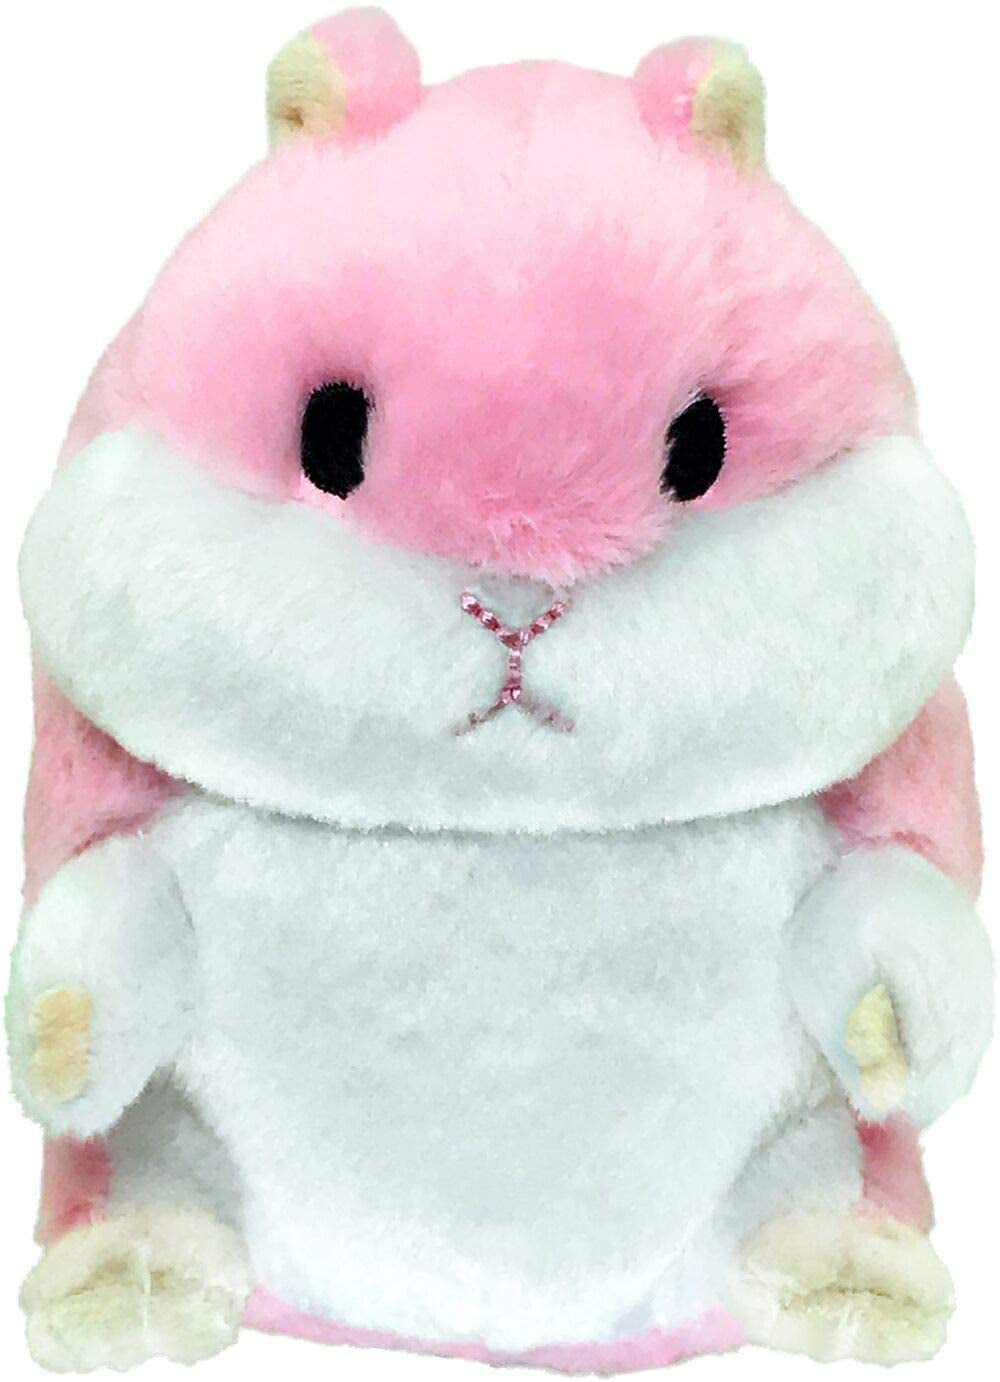 Petsport Tiny Tots Fat Hamster Plush Dog Toy Pink For Pet With Love